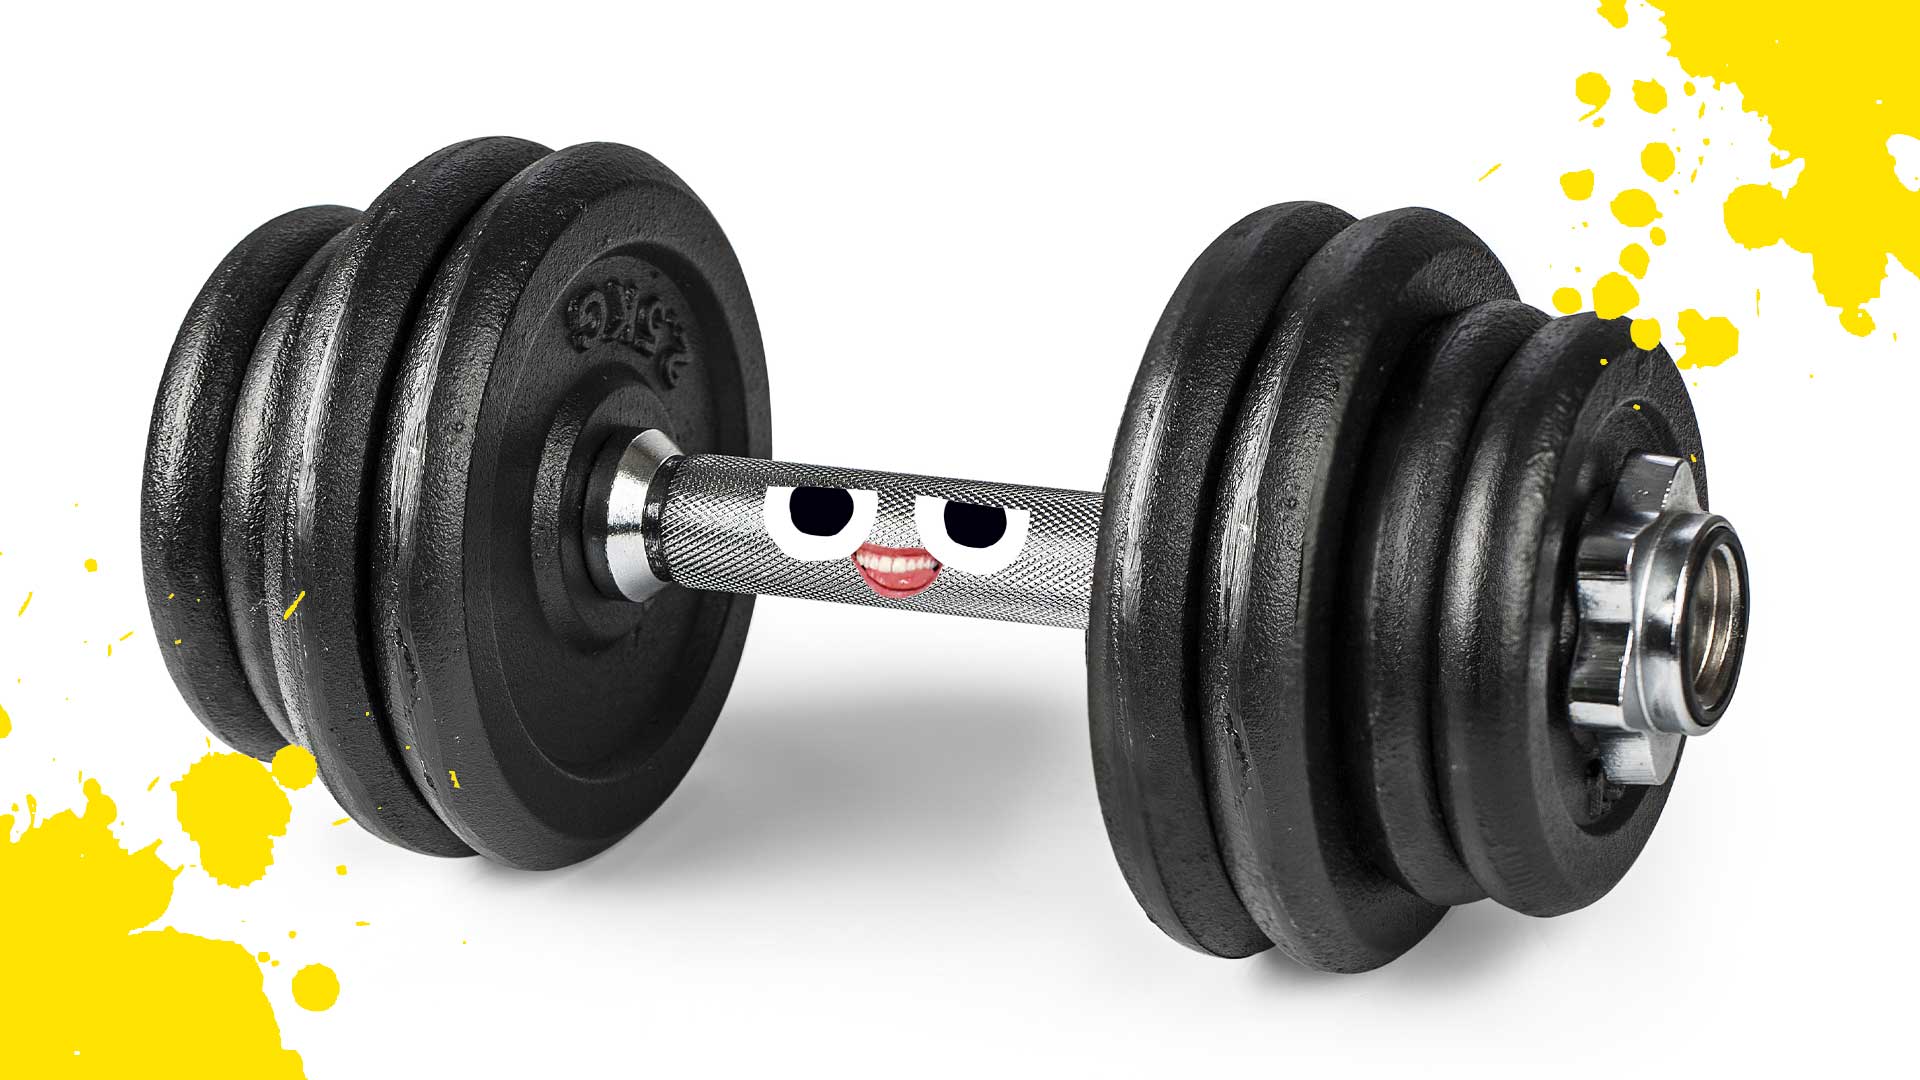 Weights with a cheeky face